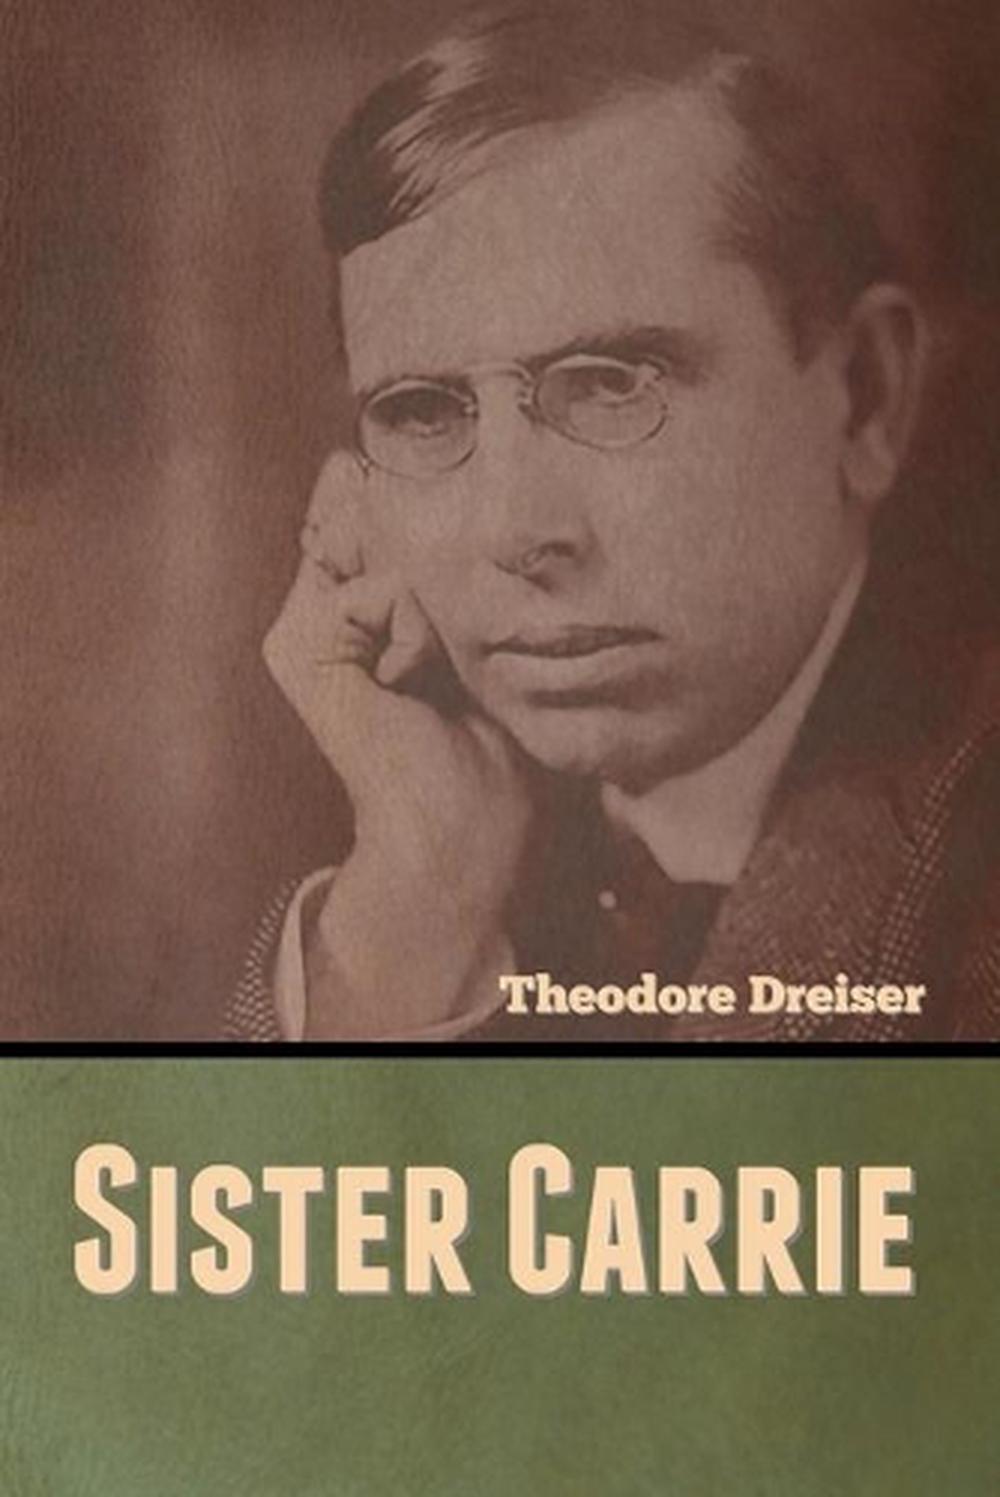 sister carrie book